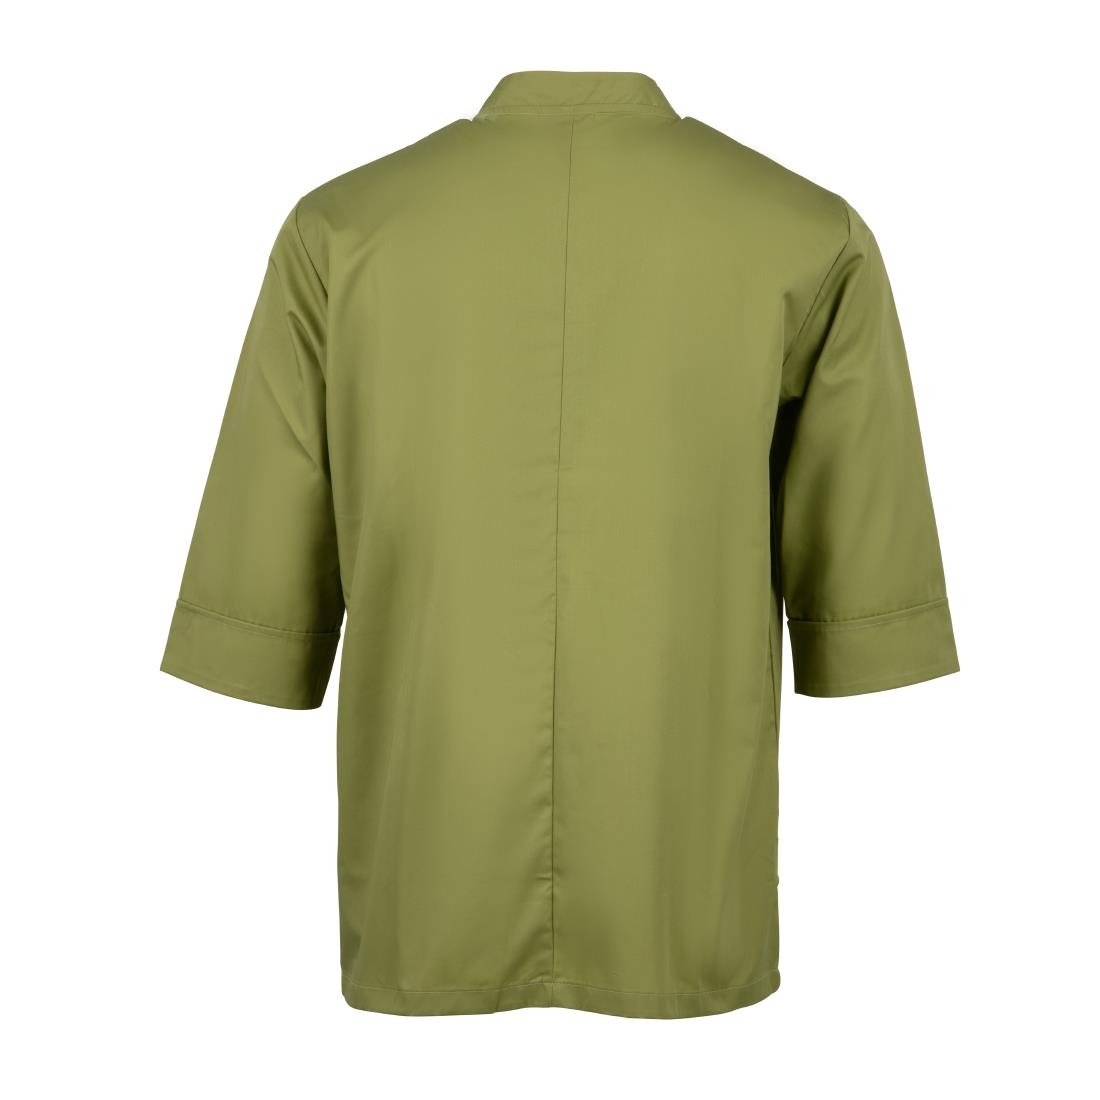 B107-XL Chef Works Unisex Chefs Jacket Lime XL JD Catering Equipment Solutions Ltd